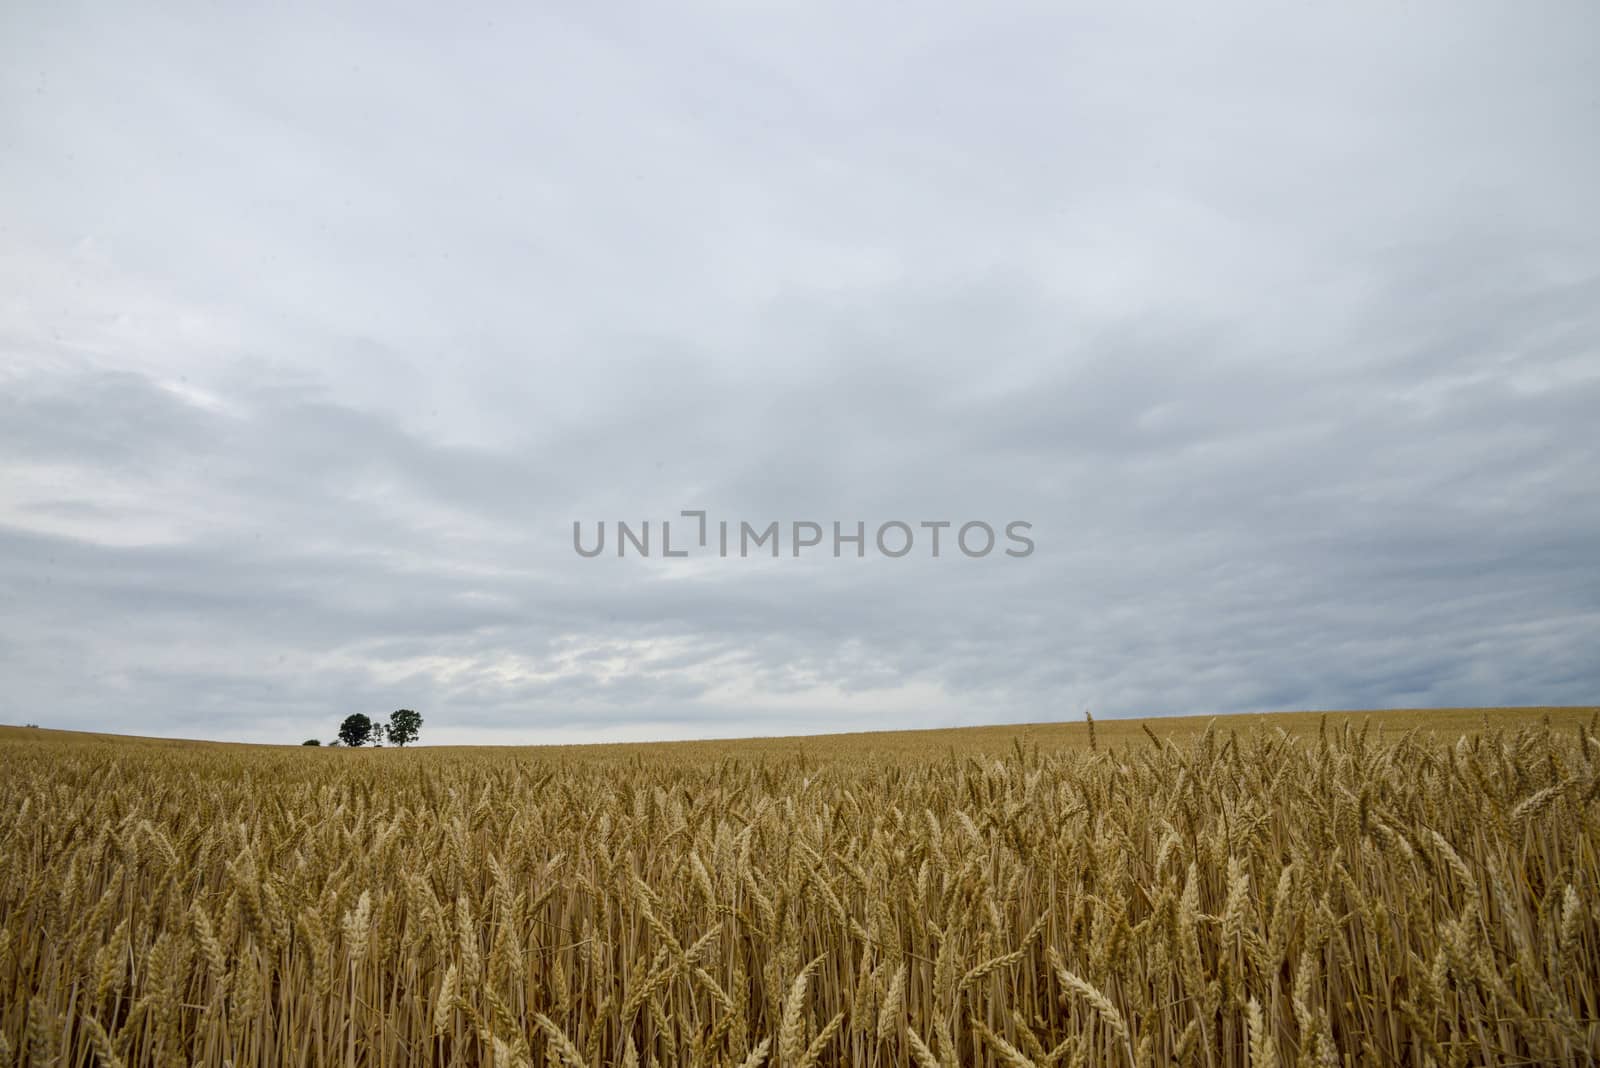 Parents and child tree in barley field7